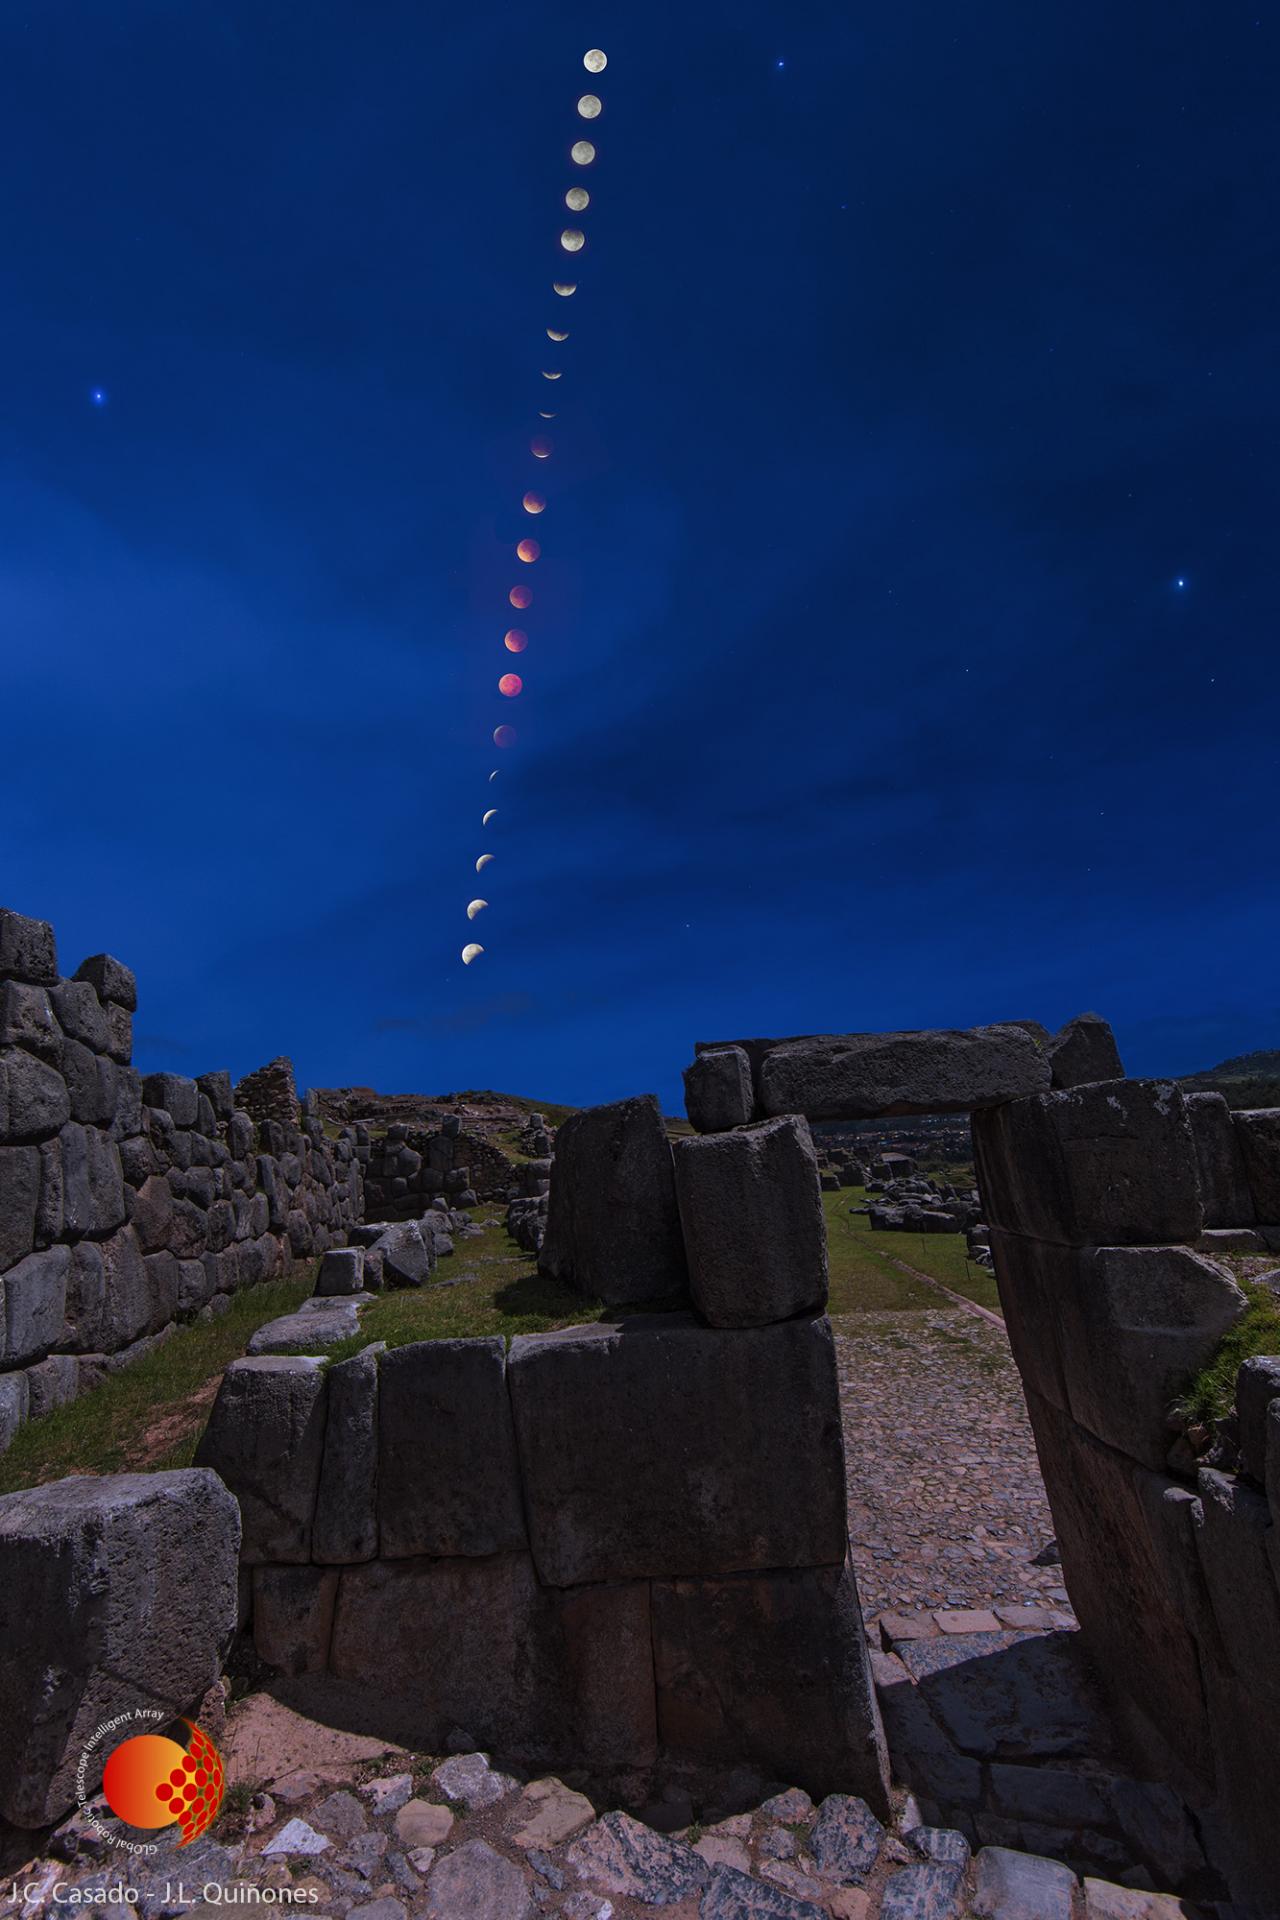 Images of the lunar eclipse taken by the GLORIA team at Cusco (Peru)